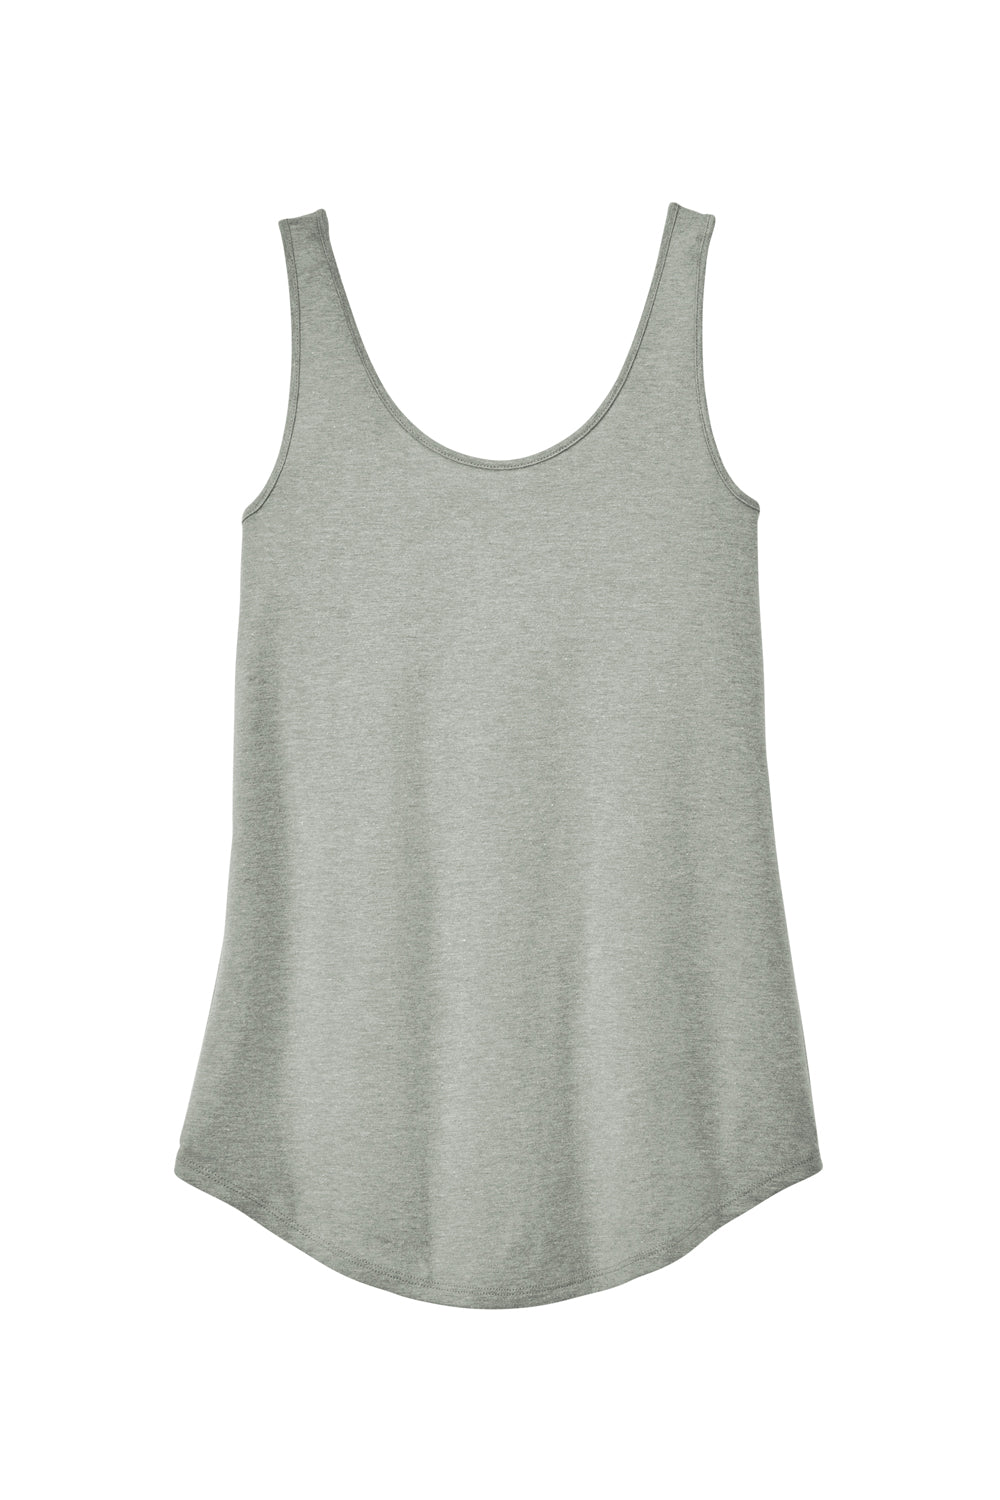 District DT151 Womens Perfect Tri Relaxed Tank Top Heather Grey Flat Front